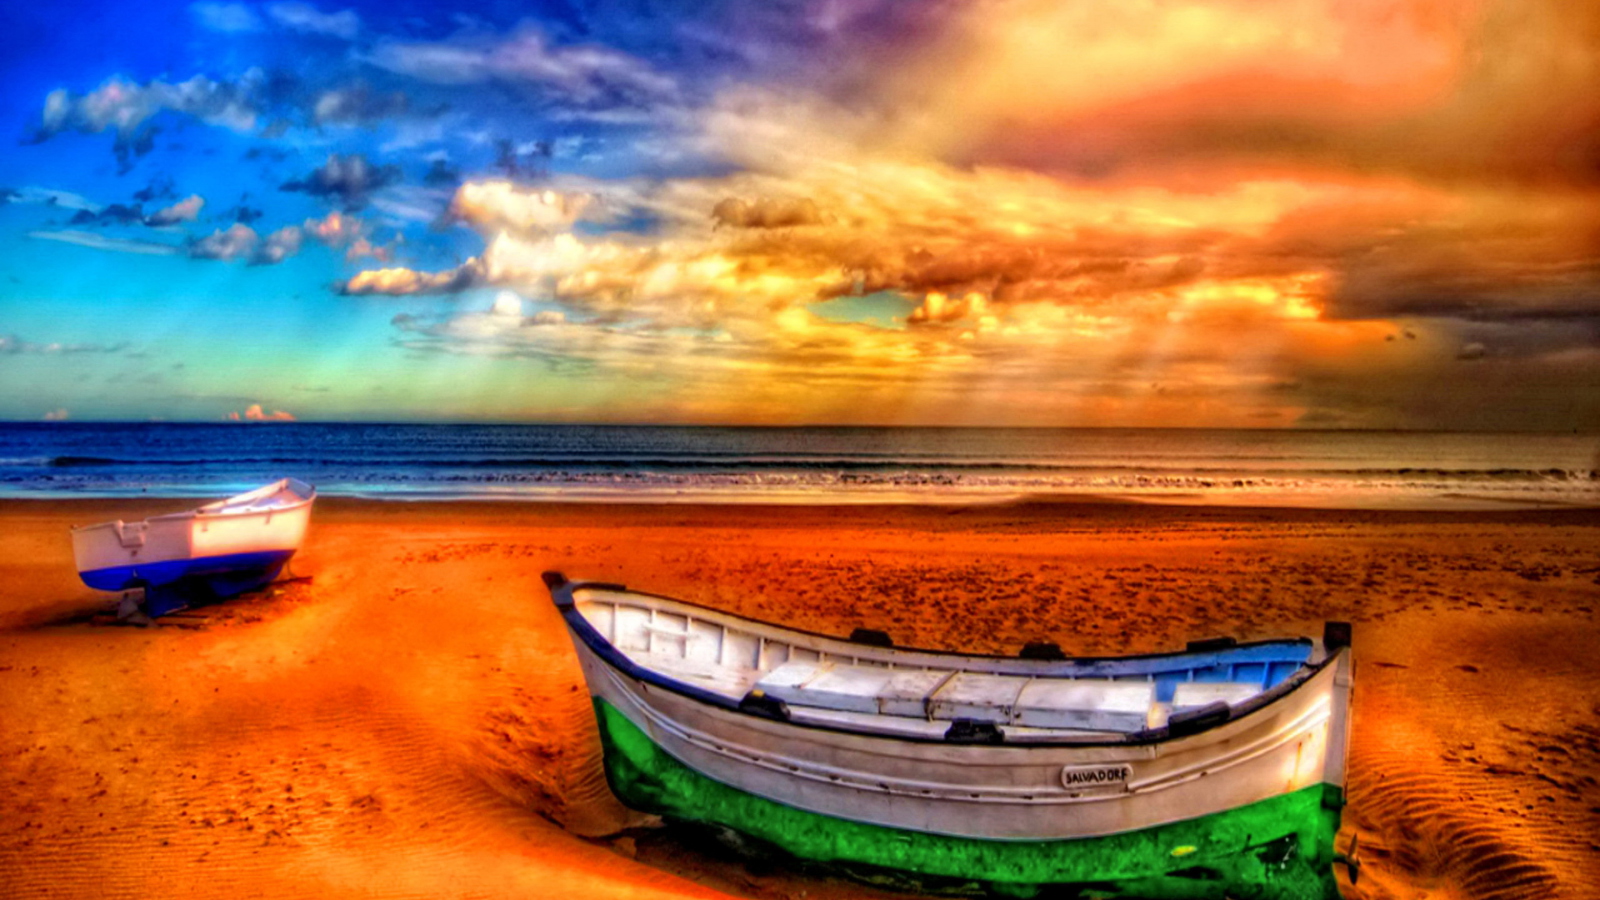 Seascape And Boat wallpaper 1600x900